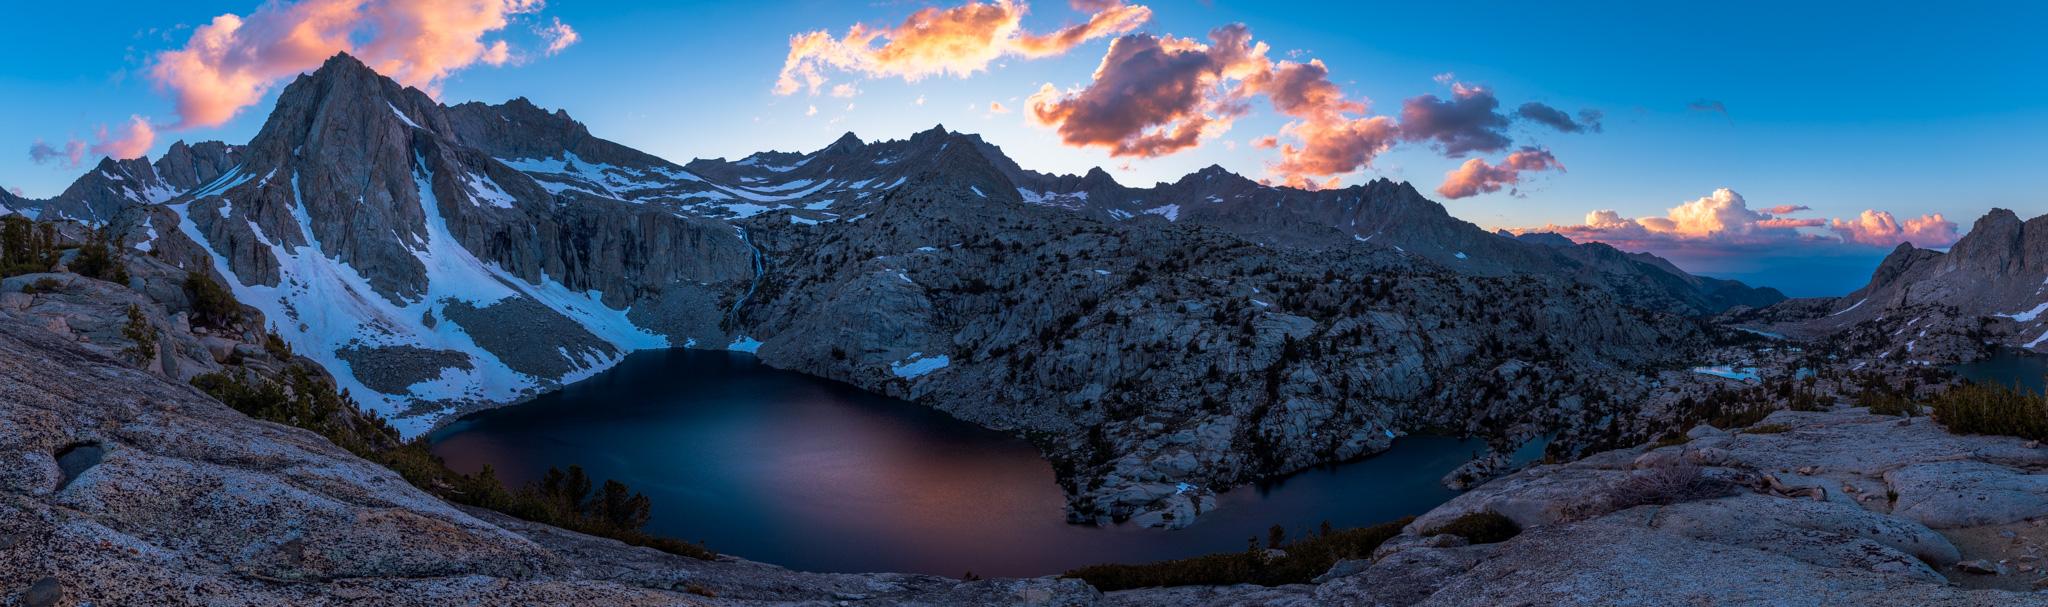 Panoramic shot of a sunset over Hungry Packer Lake in the Sabrina Basin.  Photo by Brock Dallman